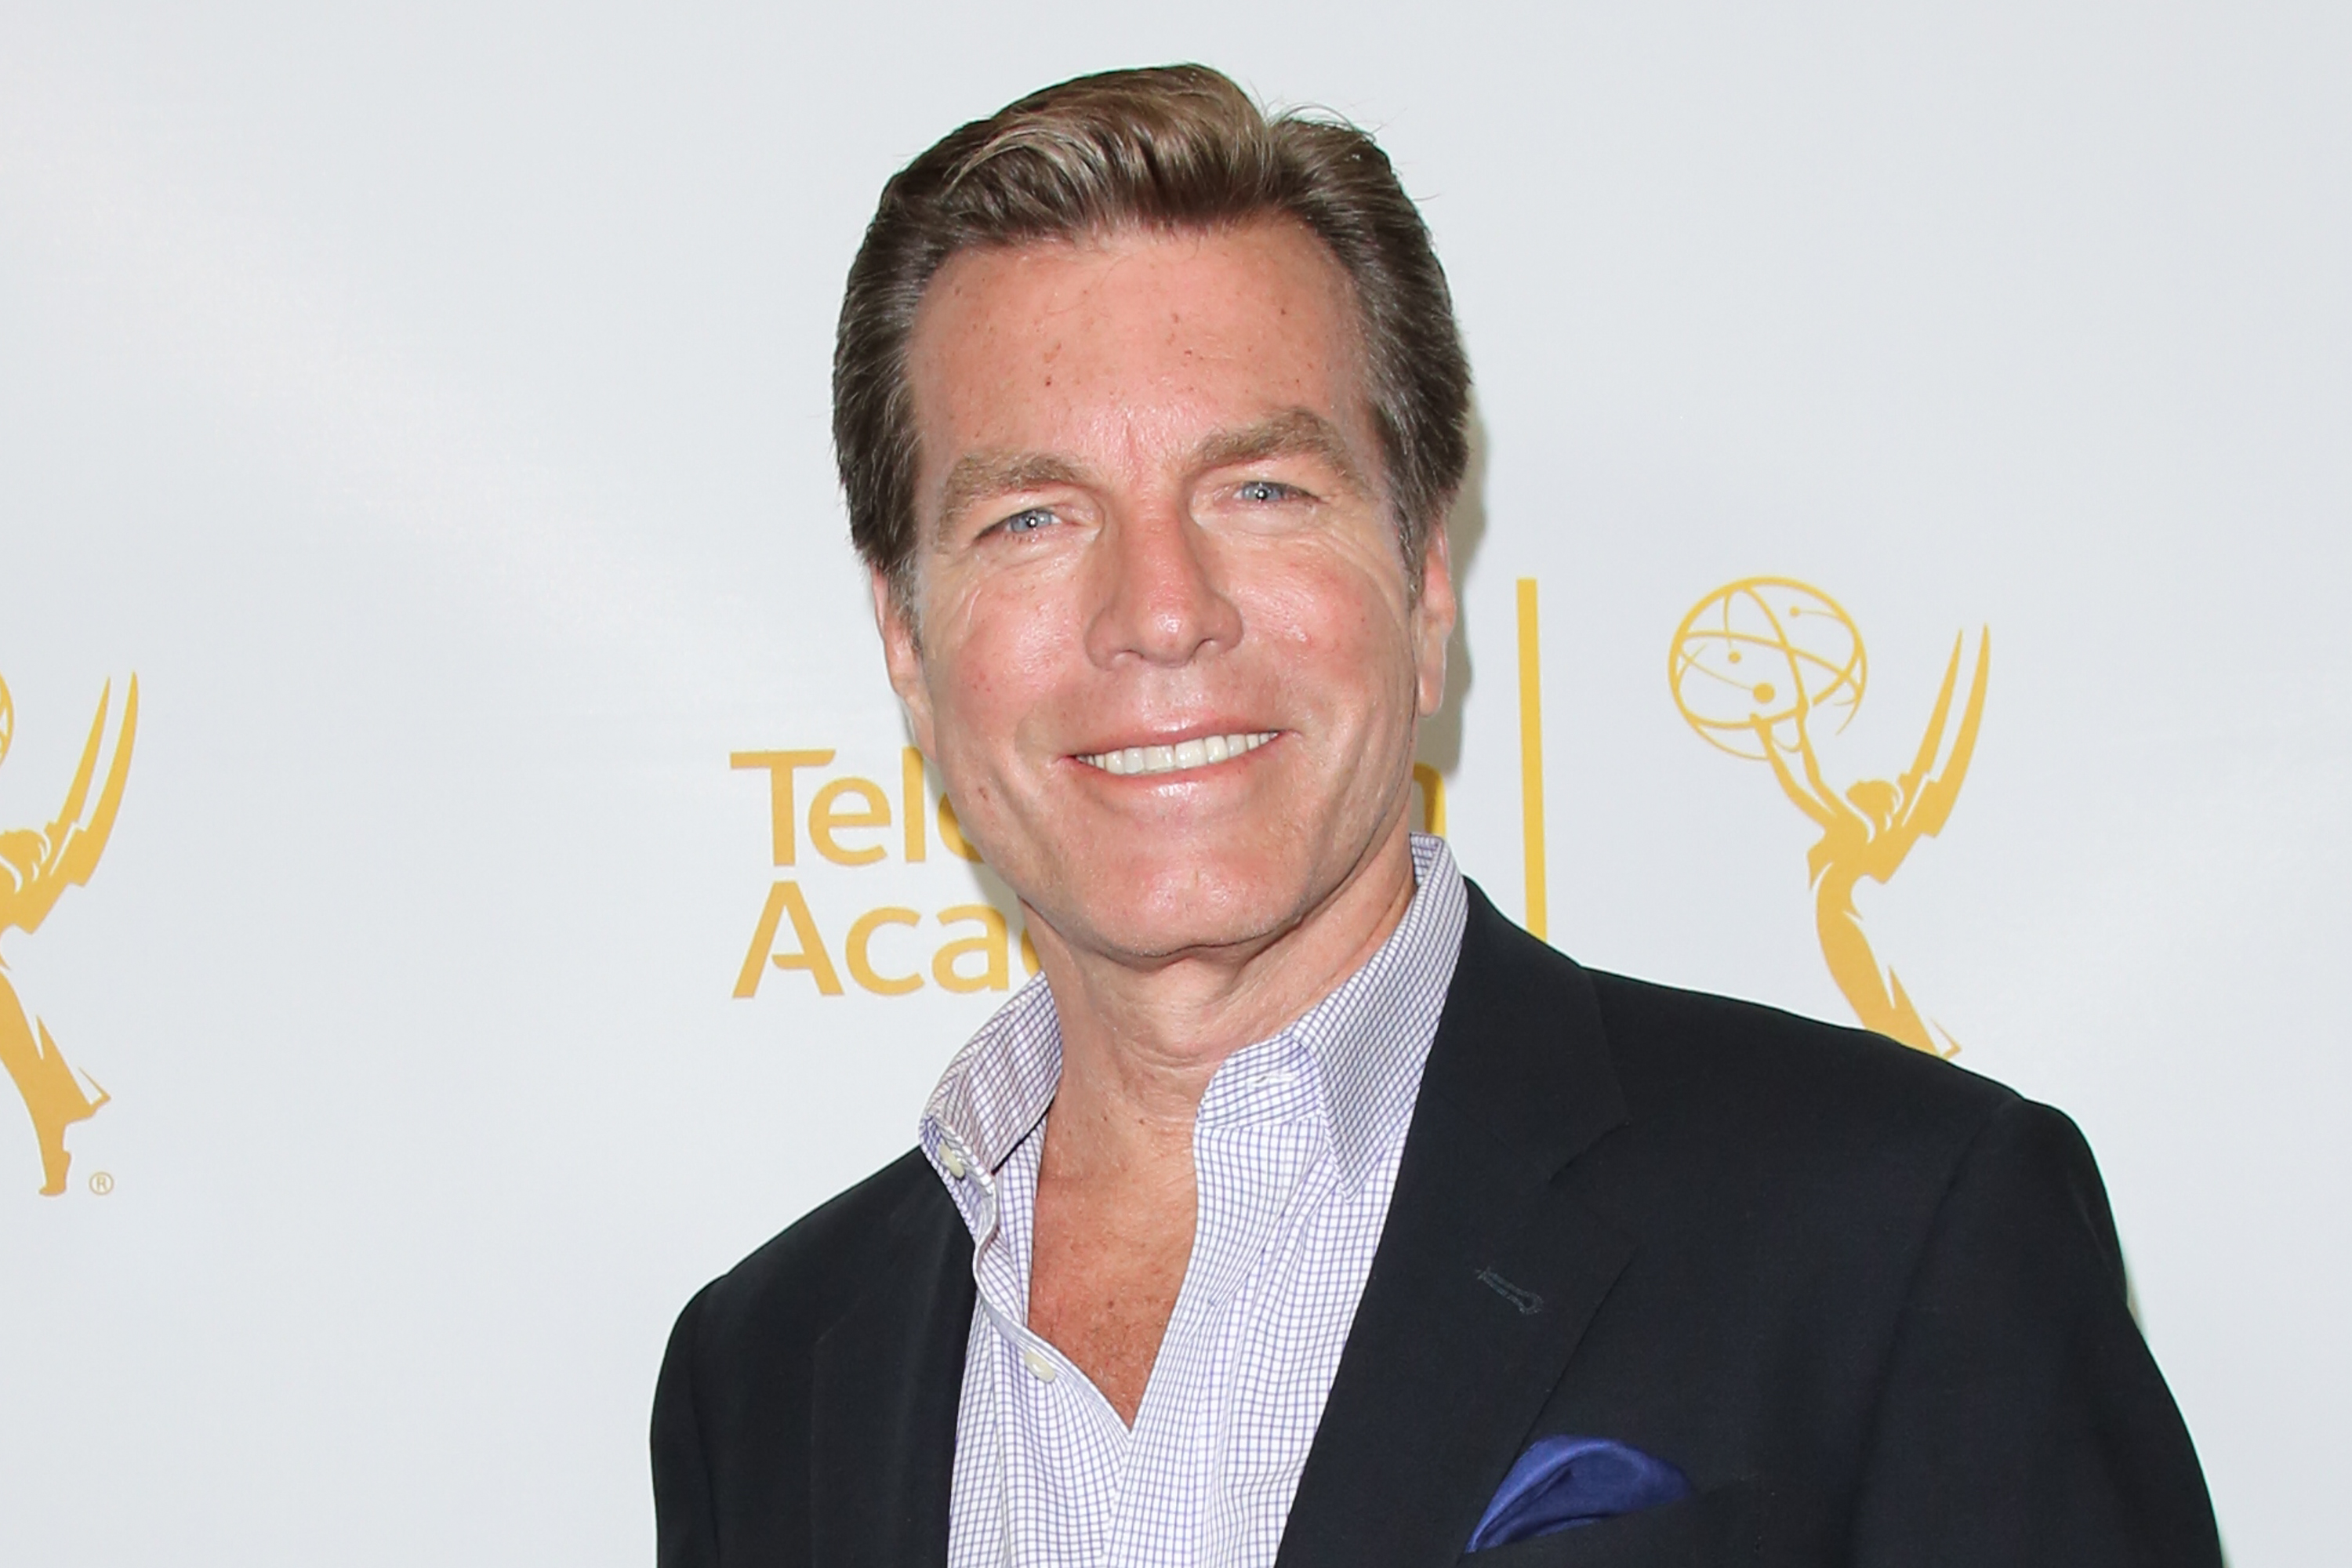 'The Young and the Restless' actor Peter Bergman wearing a blue suit and shirt during a red carpet appearance.